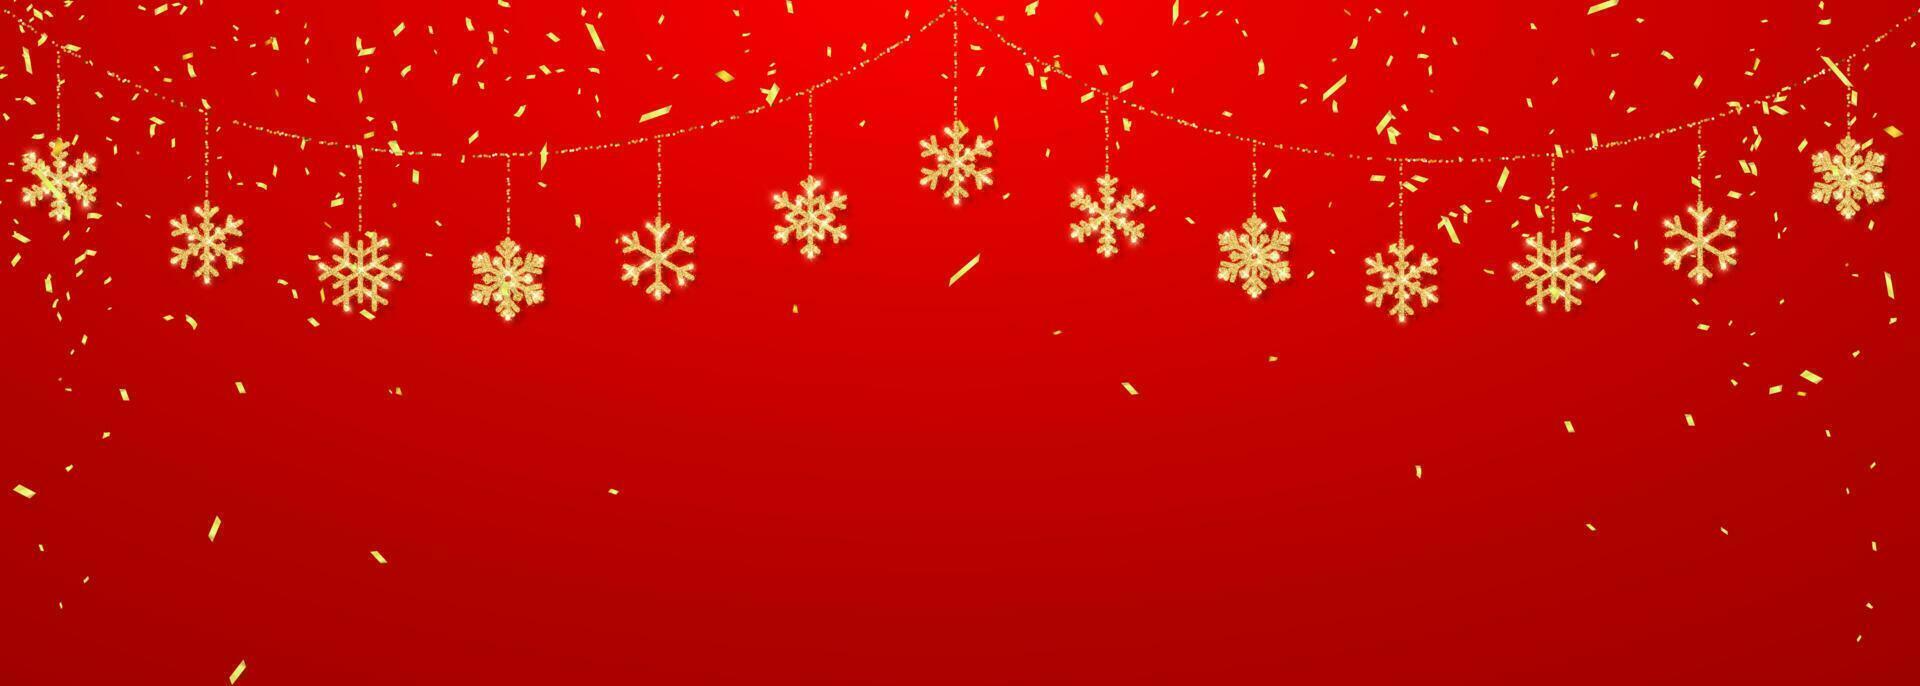 Christmas or New Year golden snowflake decoration garland on red background. Hanging glitter snowflake. Vector illustration